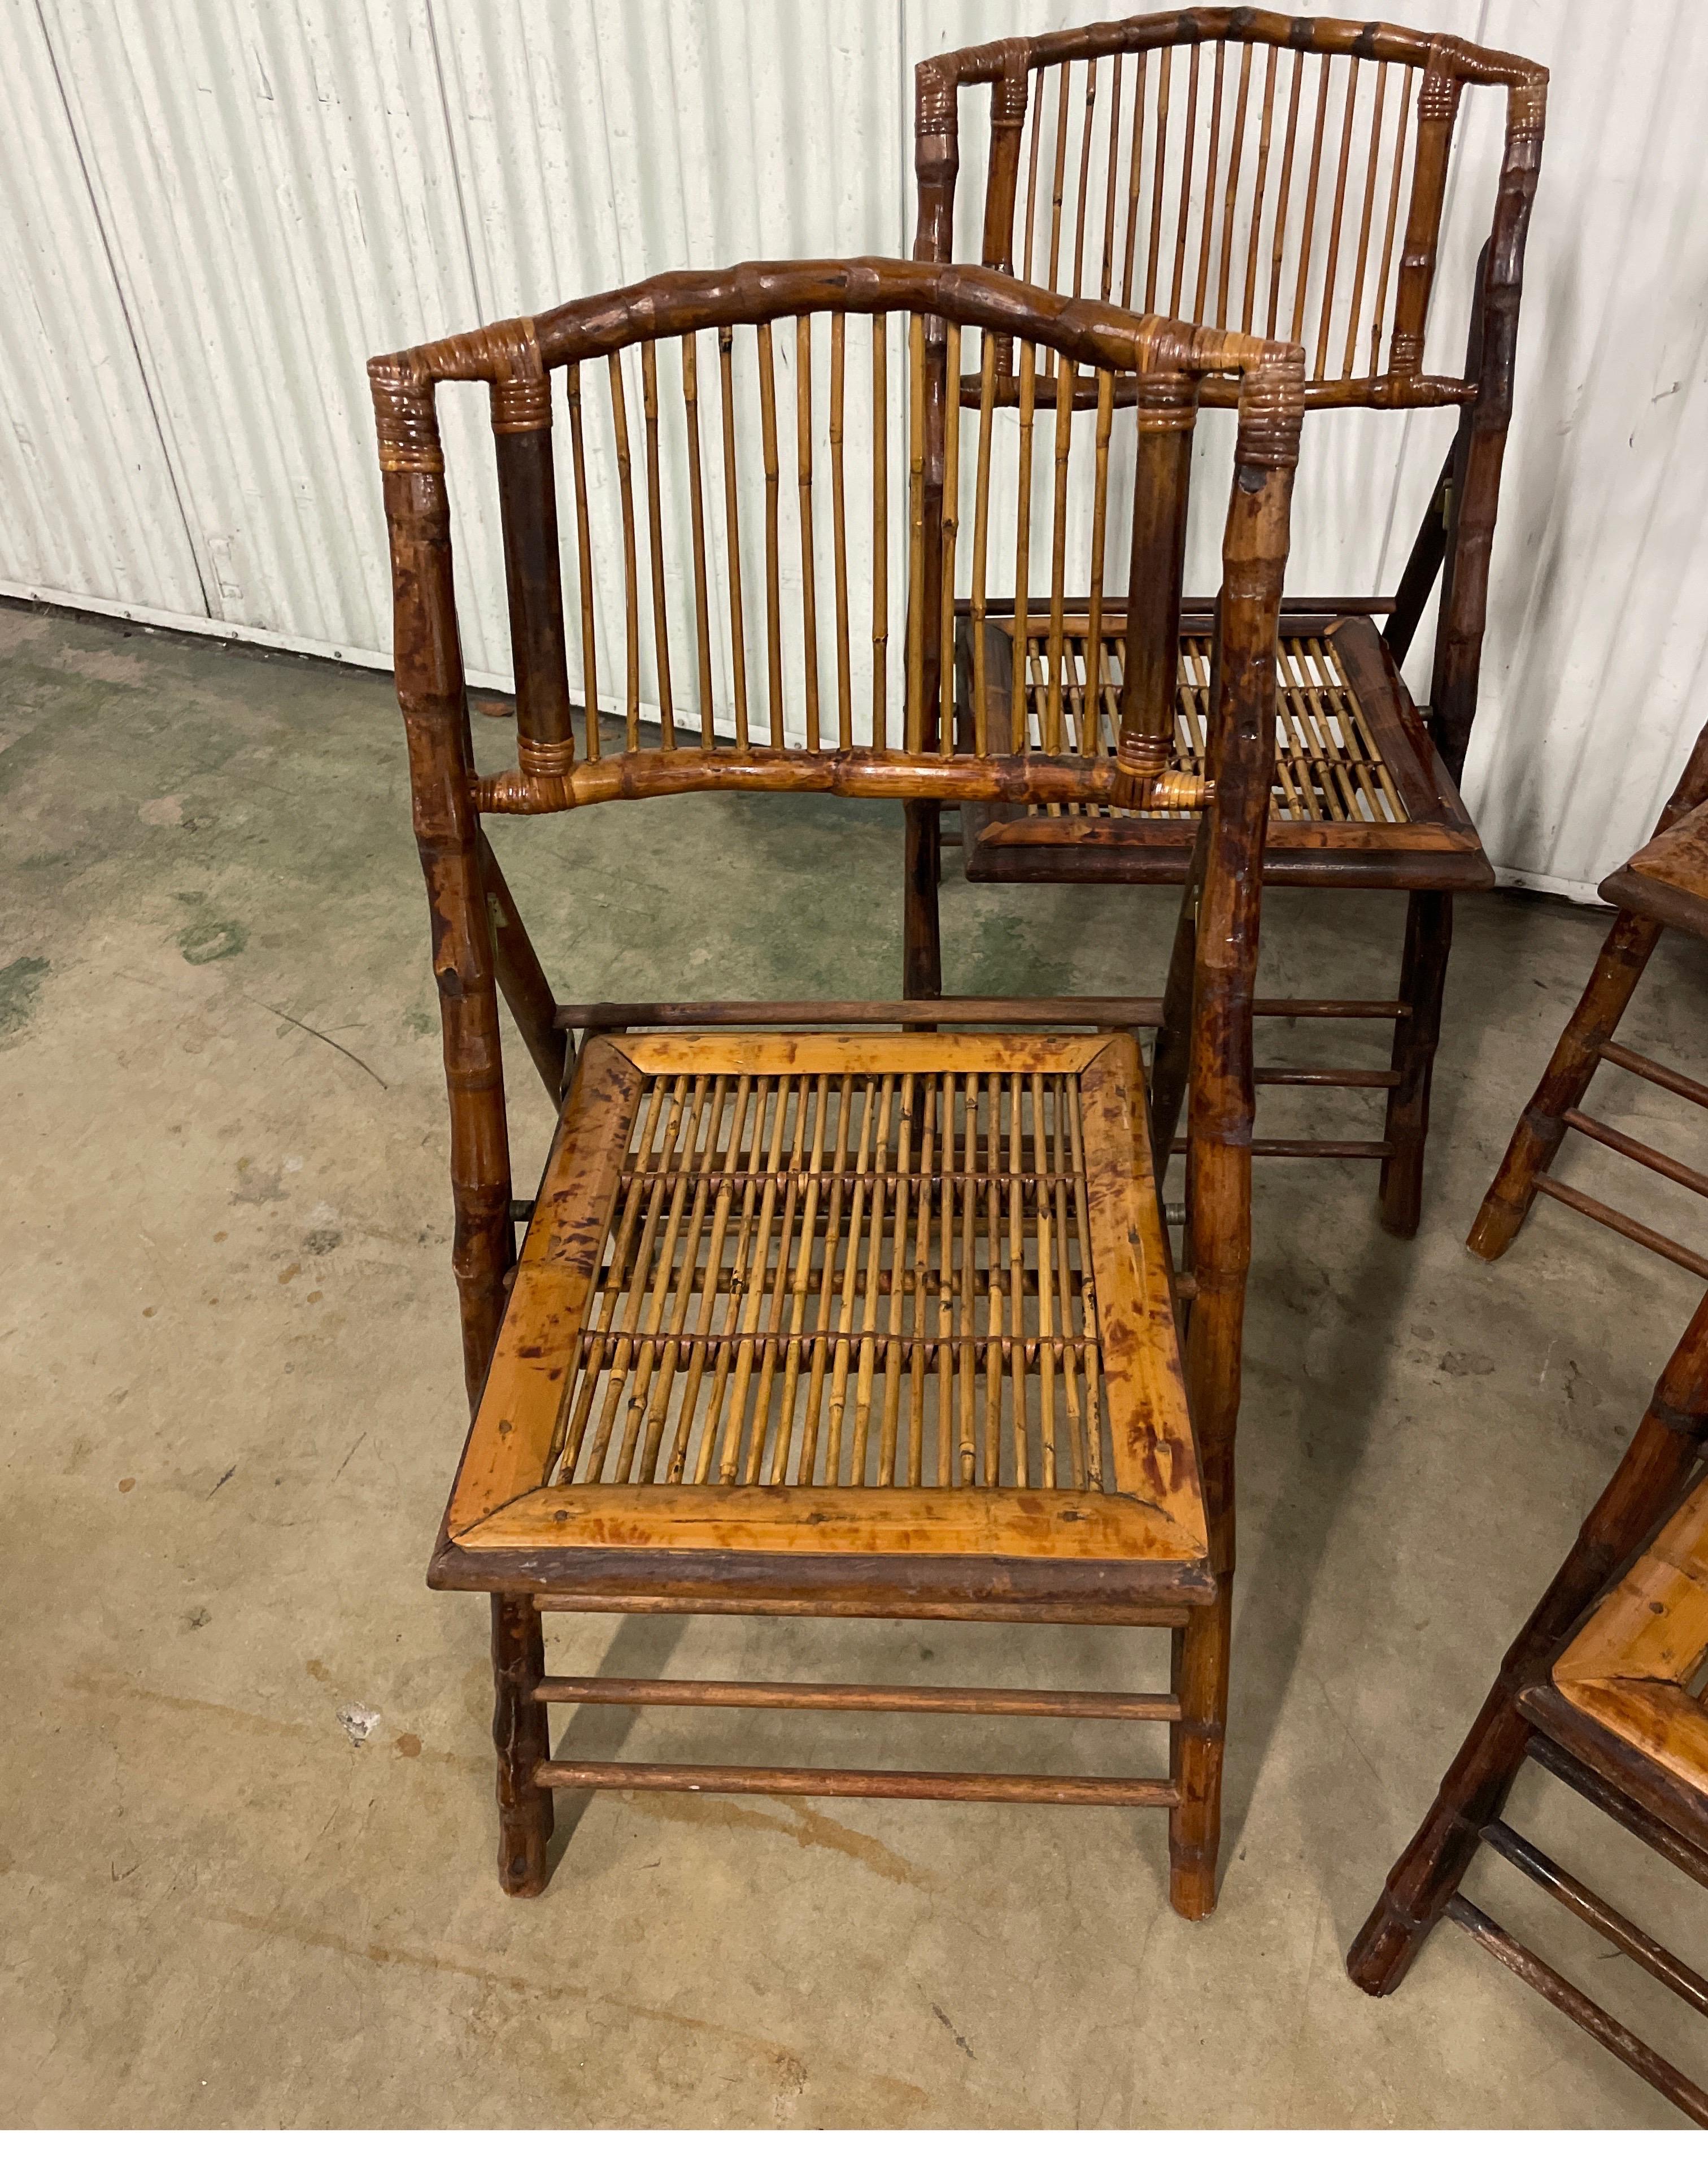 Very good set of four British Colonial Style Burnt Bamboo Tortoise folding chairs. Well constructed and sturdy. An additional set of four is also available for purchase.